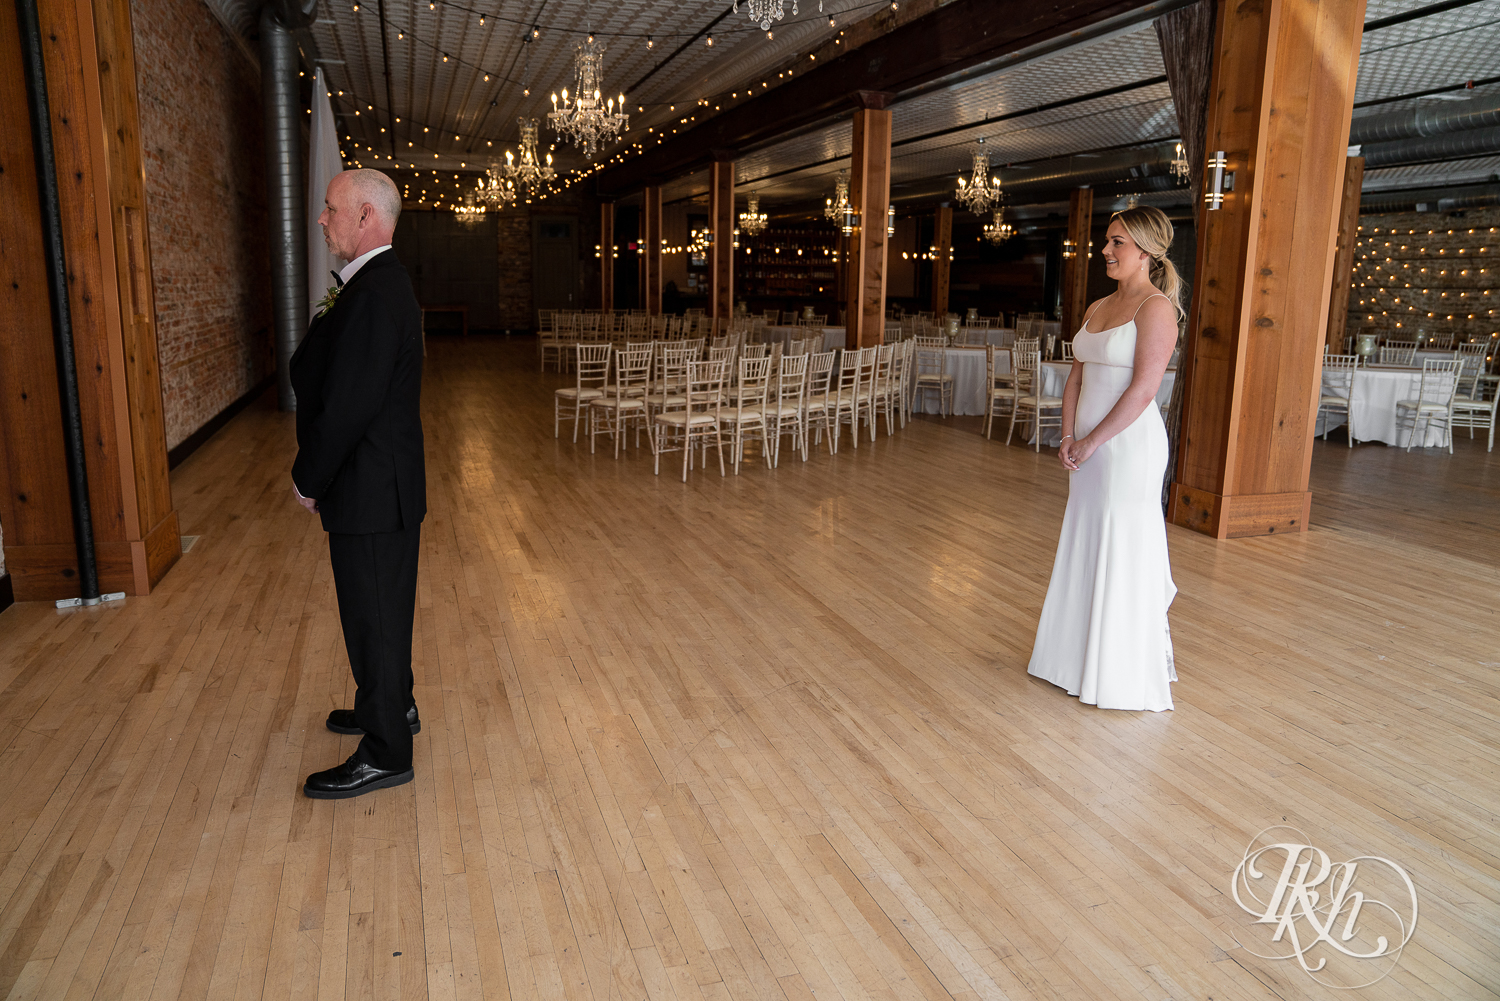 Bride and dad share first look at the 3 Ten Event Center in Faribault, Minnesota.